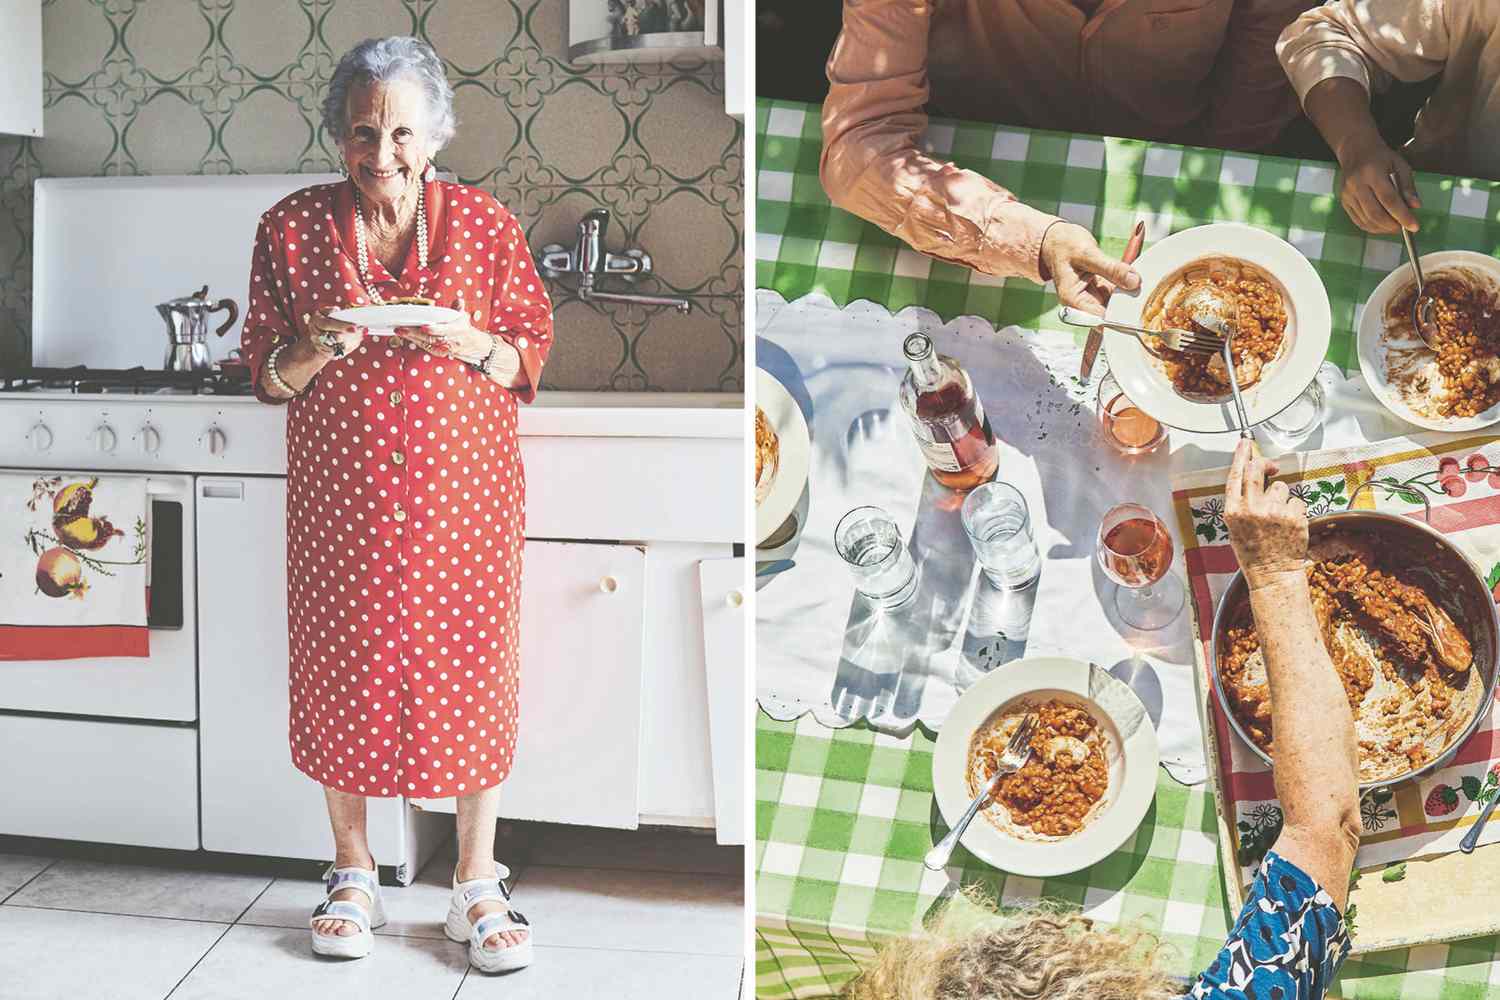 Pasta Granny holding plate aside image of hands eating food